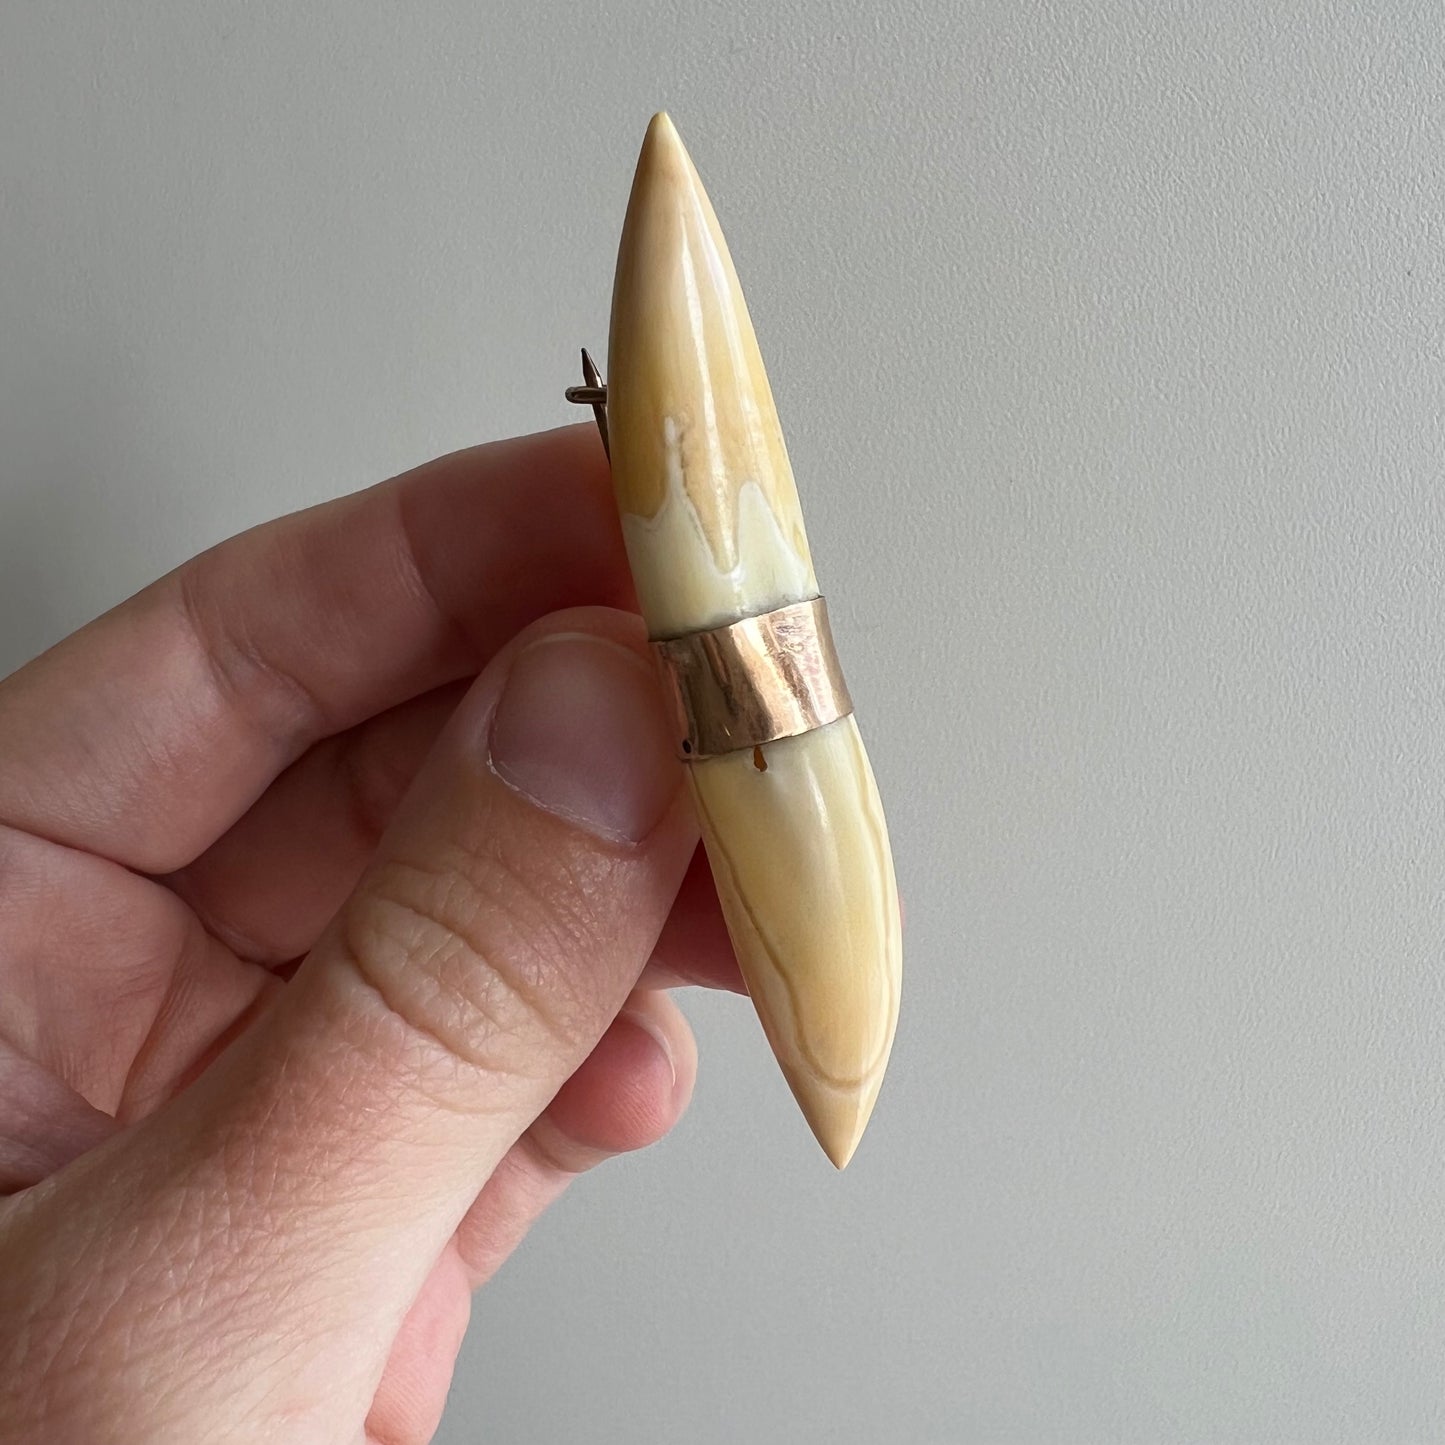 A N T I Q U E // double tusk / gold filled boar tooth or tusk / a brooch